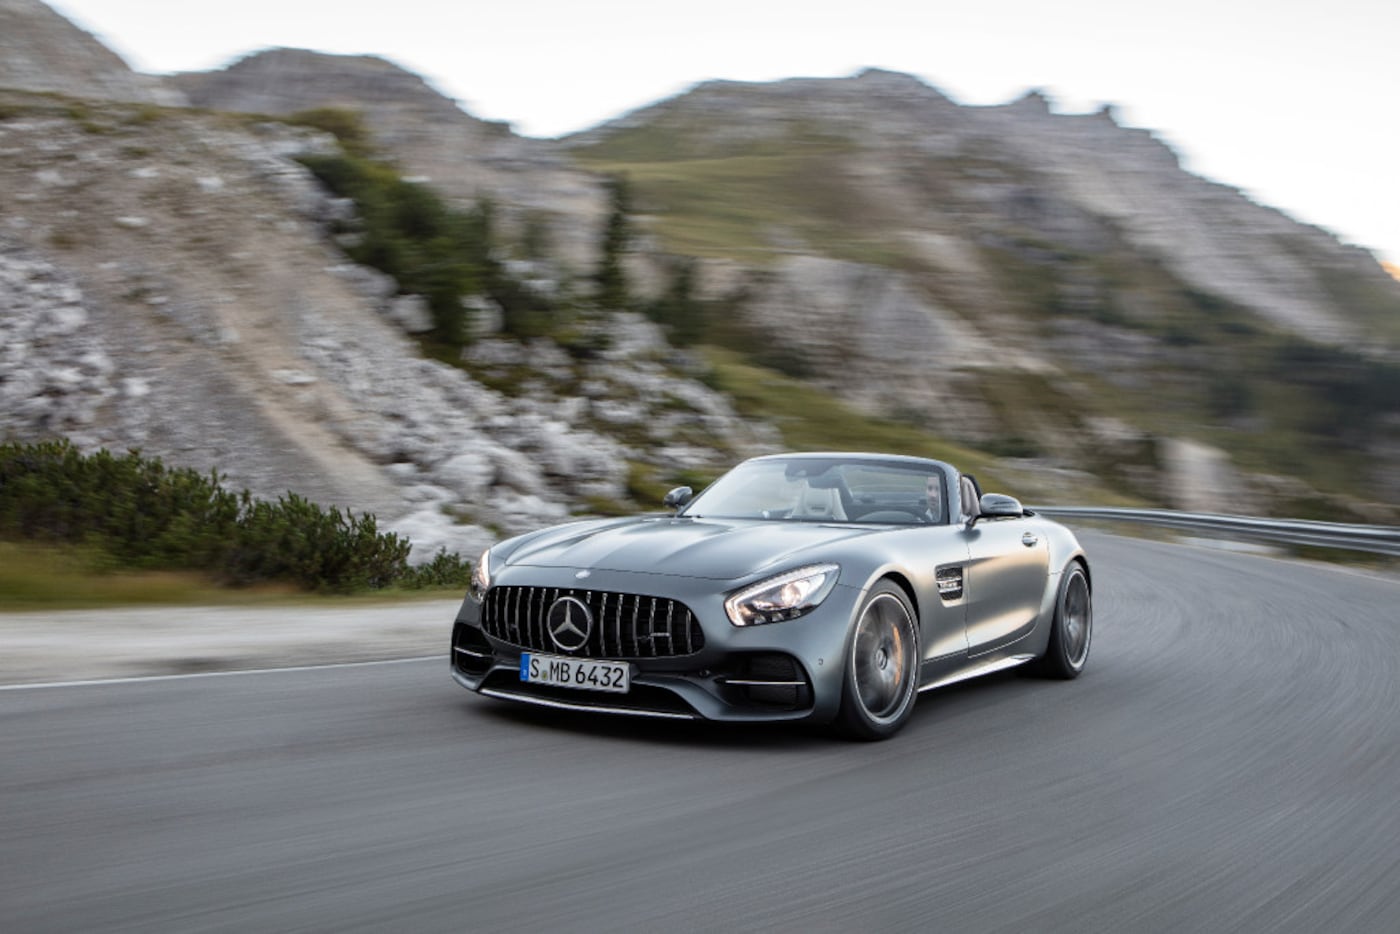 The 2018 Mercedes-AMG GT Roadster
will reach 60 mph in 3.7 seconds.